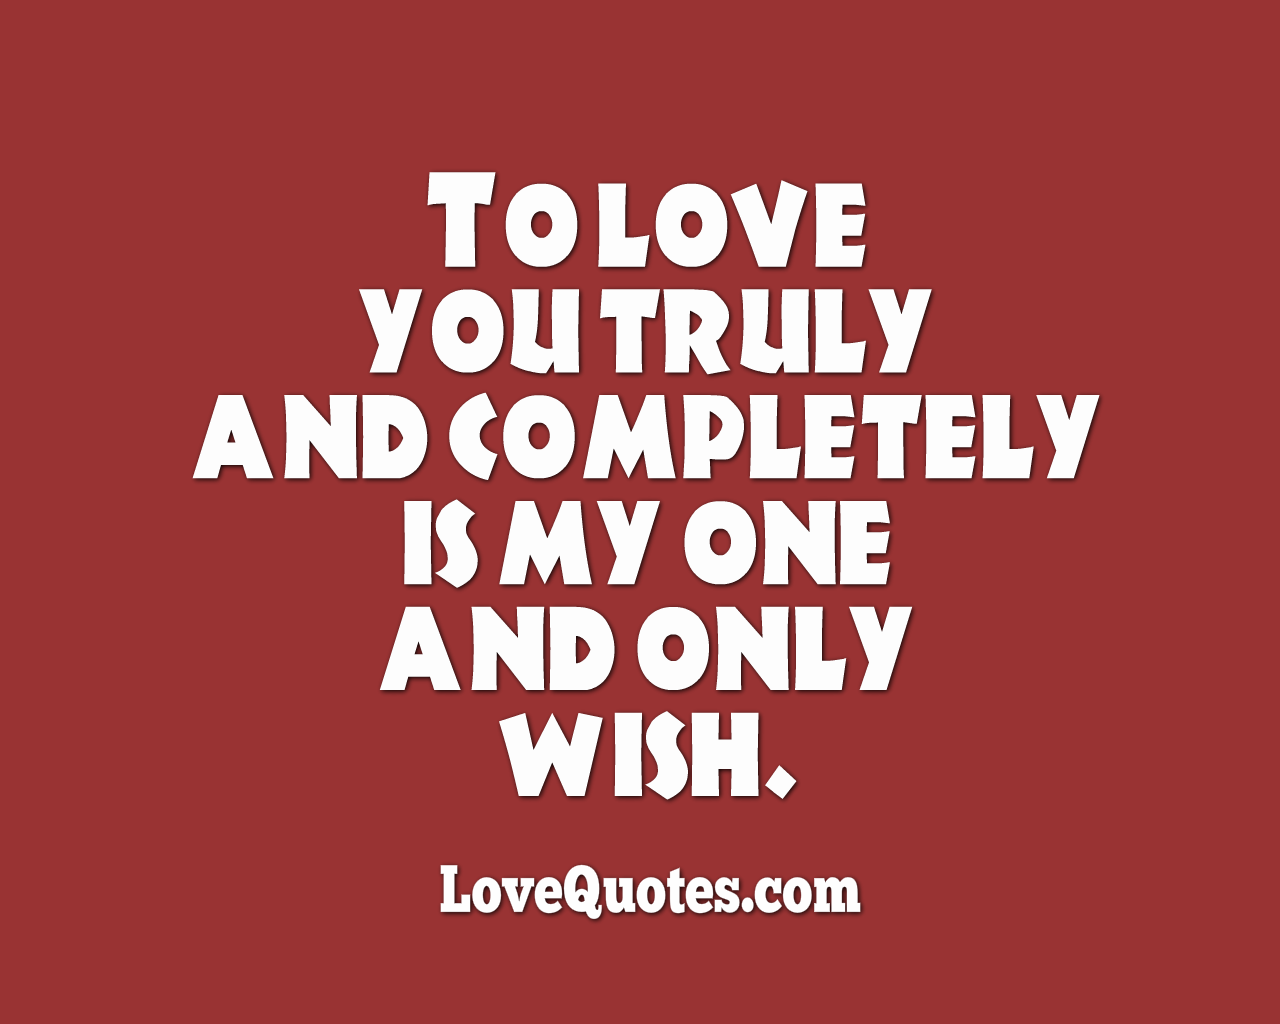 To Love You Truly and Completely